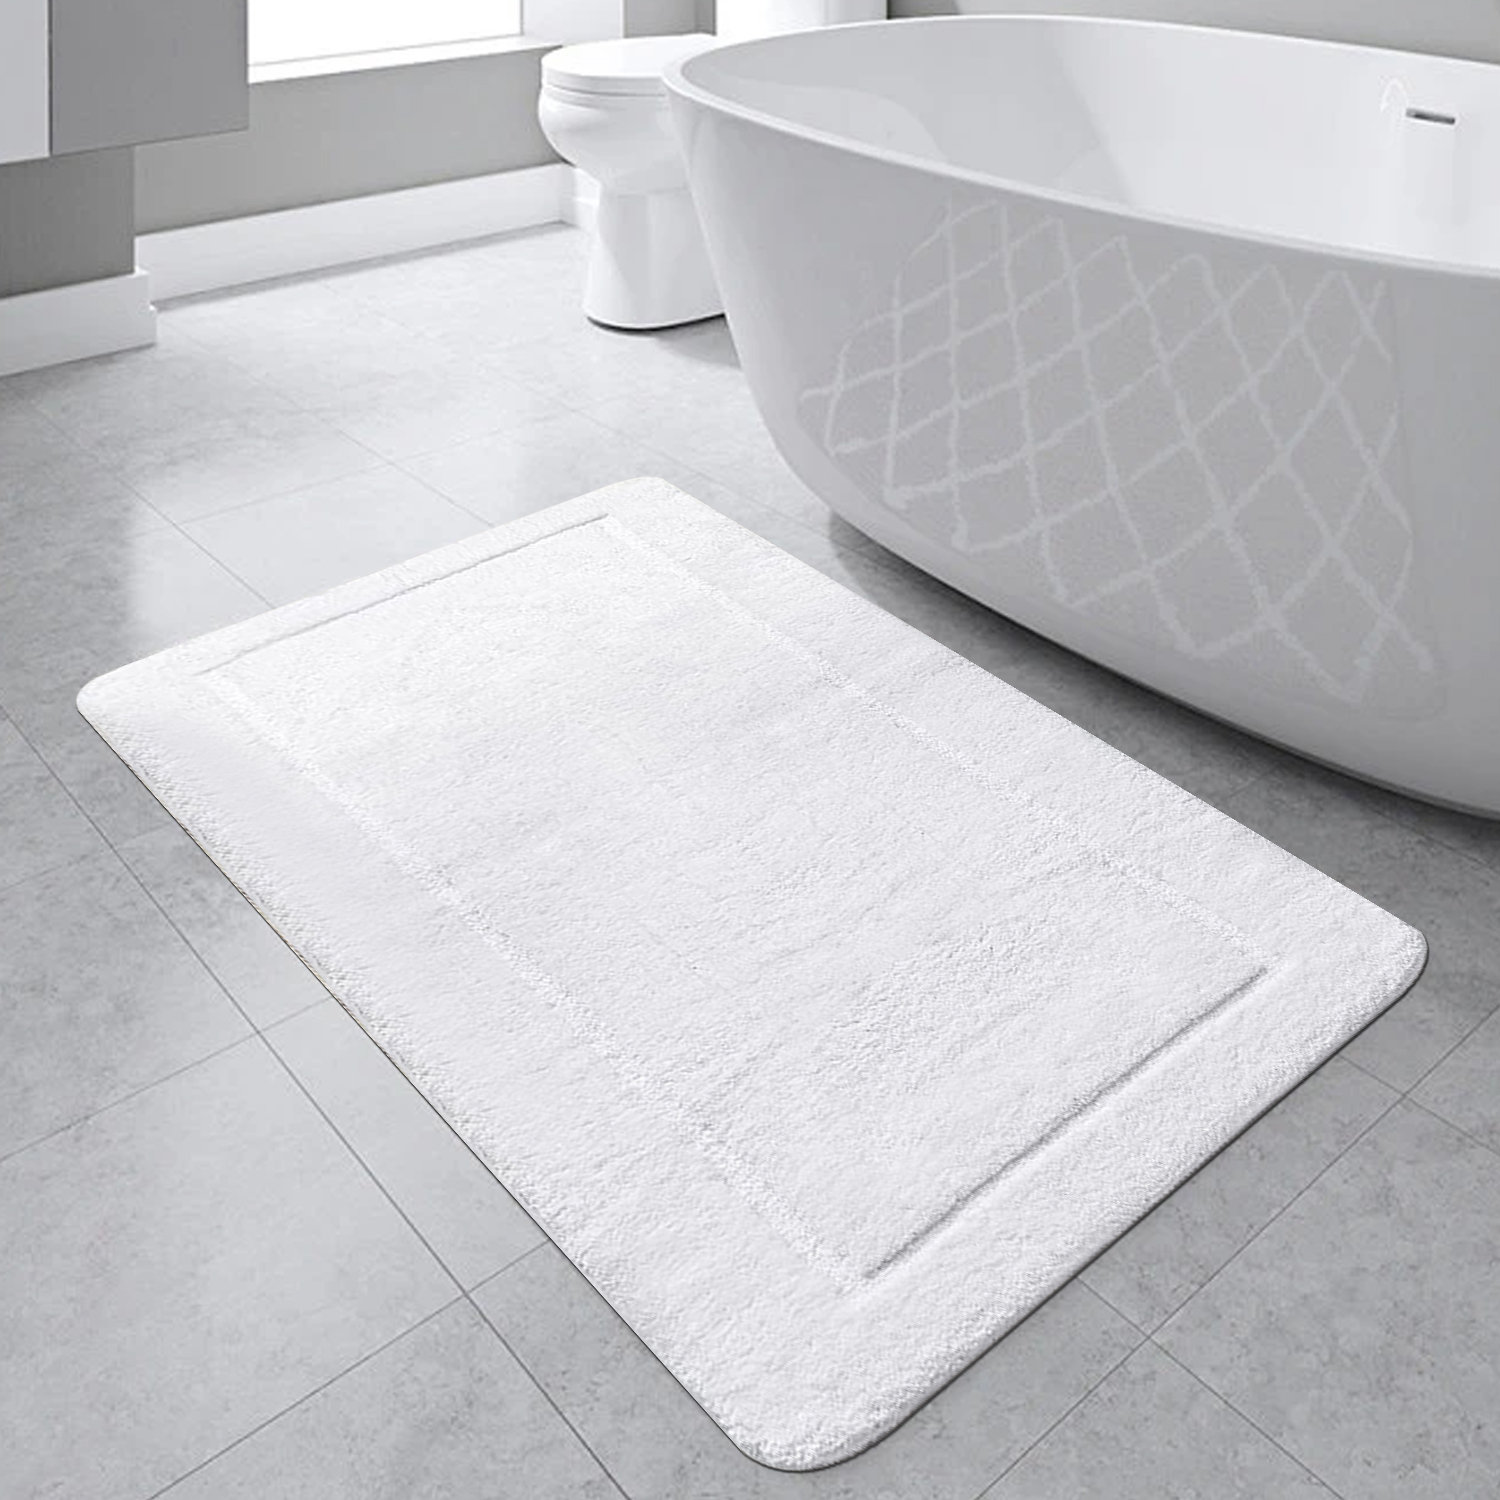 Memory Foam Bath Mat Set Non Slip Water Absorption Soft Rugs Thick Dry Fast